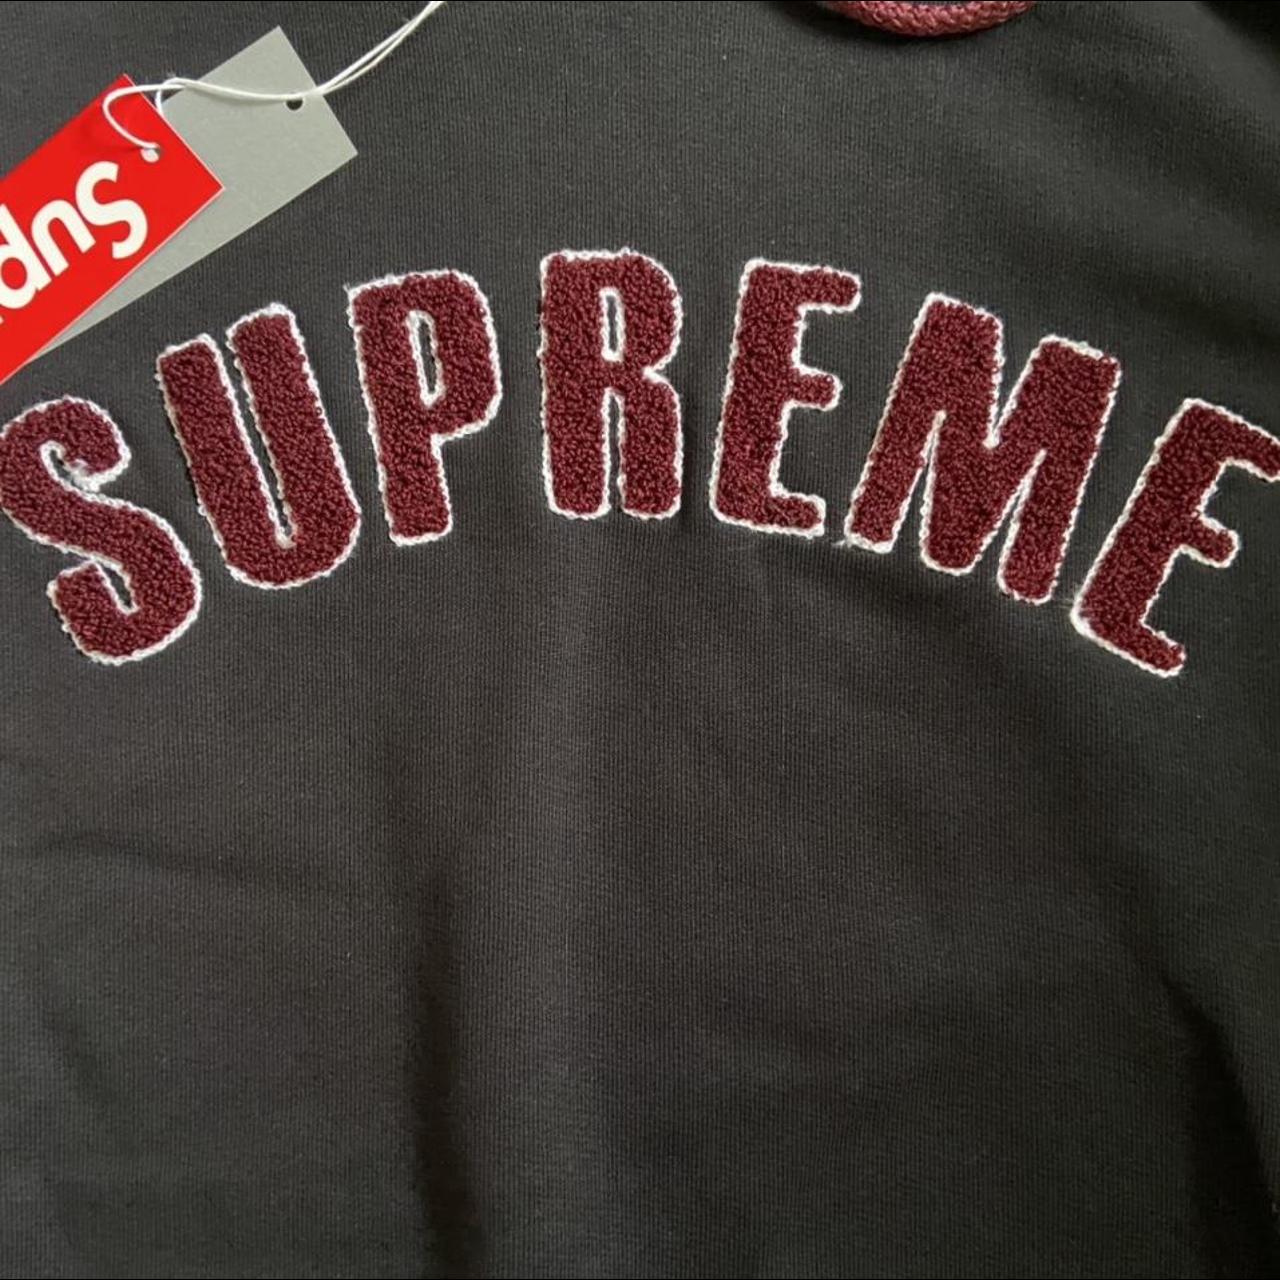 Brand new with tags authentic supreme hoodie. Black... - Depop